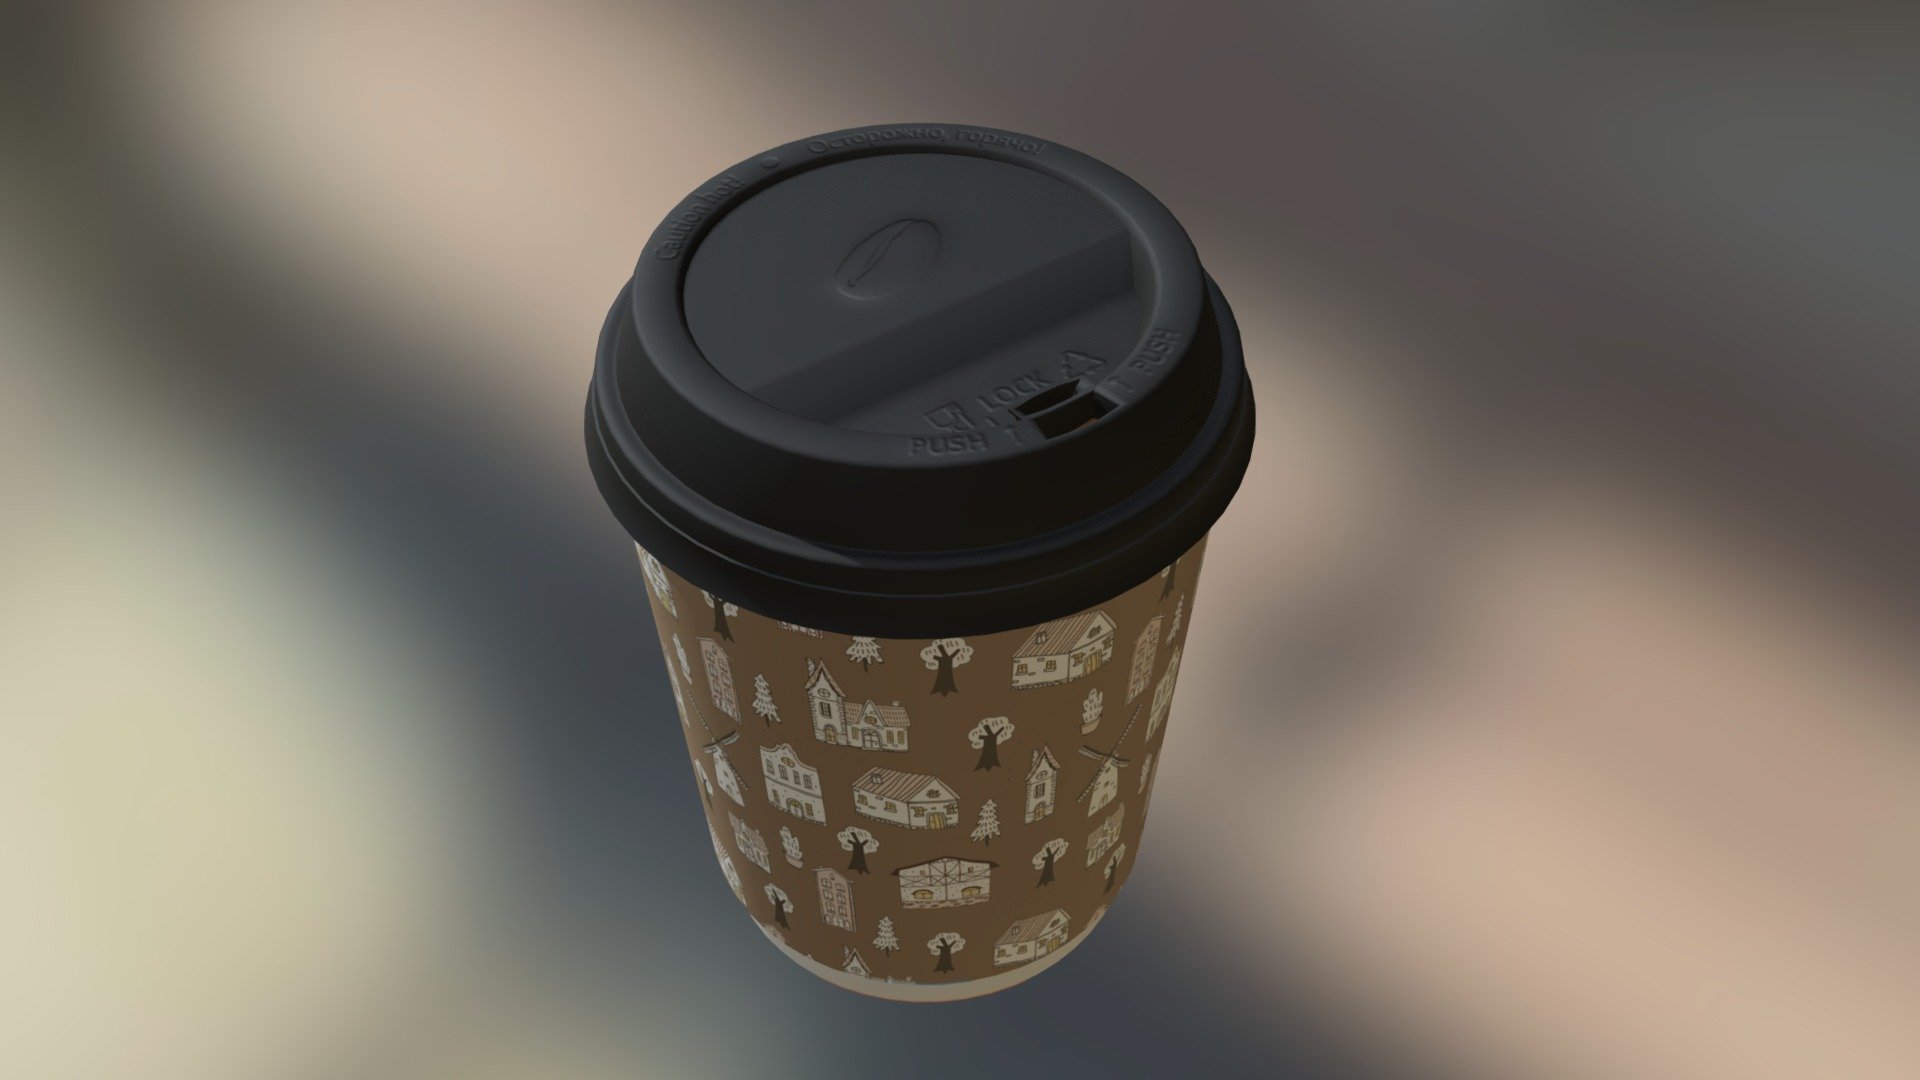 You can take this cup with you on a rainy warm autumn day.

Again just learning texturing.
Icons and normal maps are made in Ph 3d model